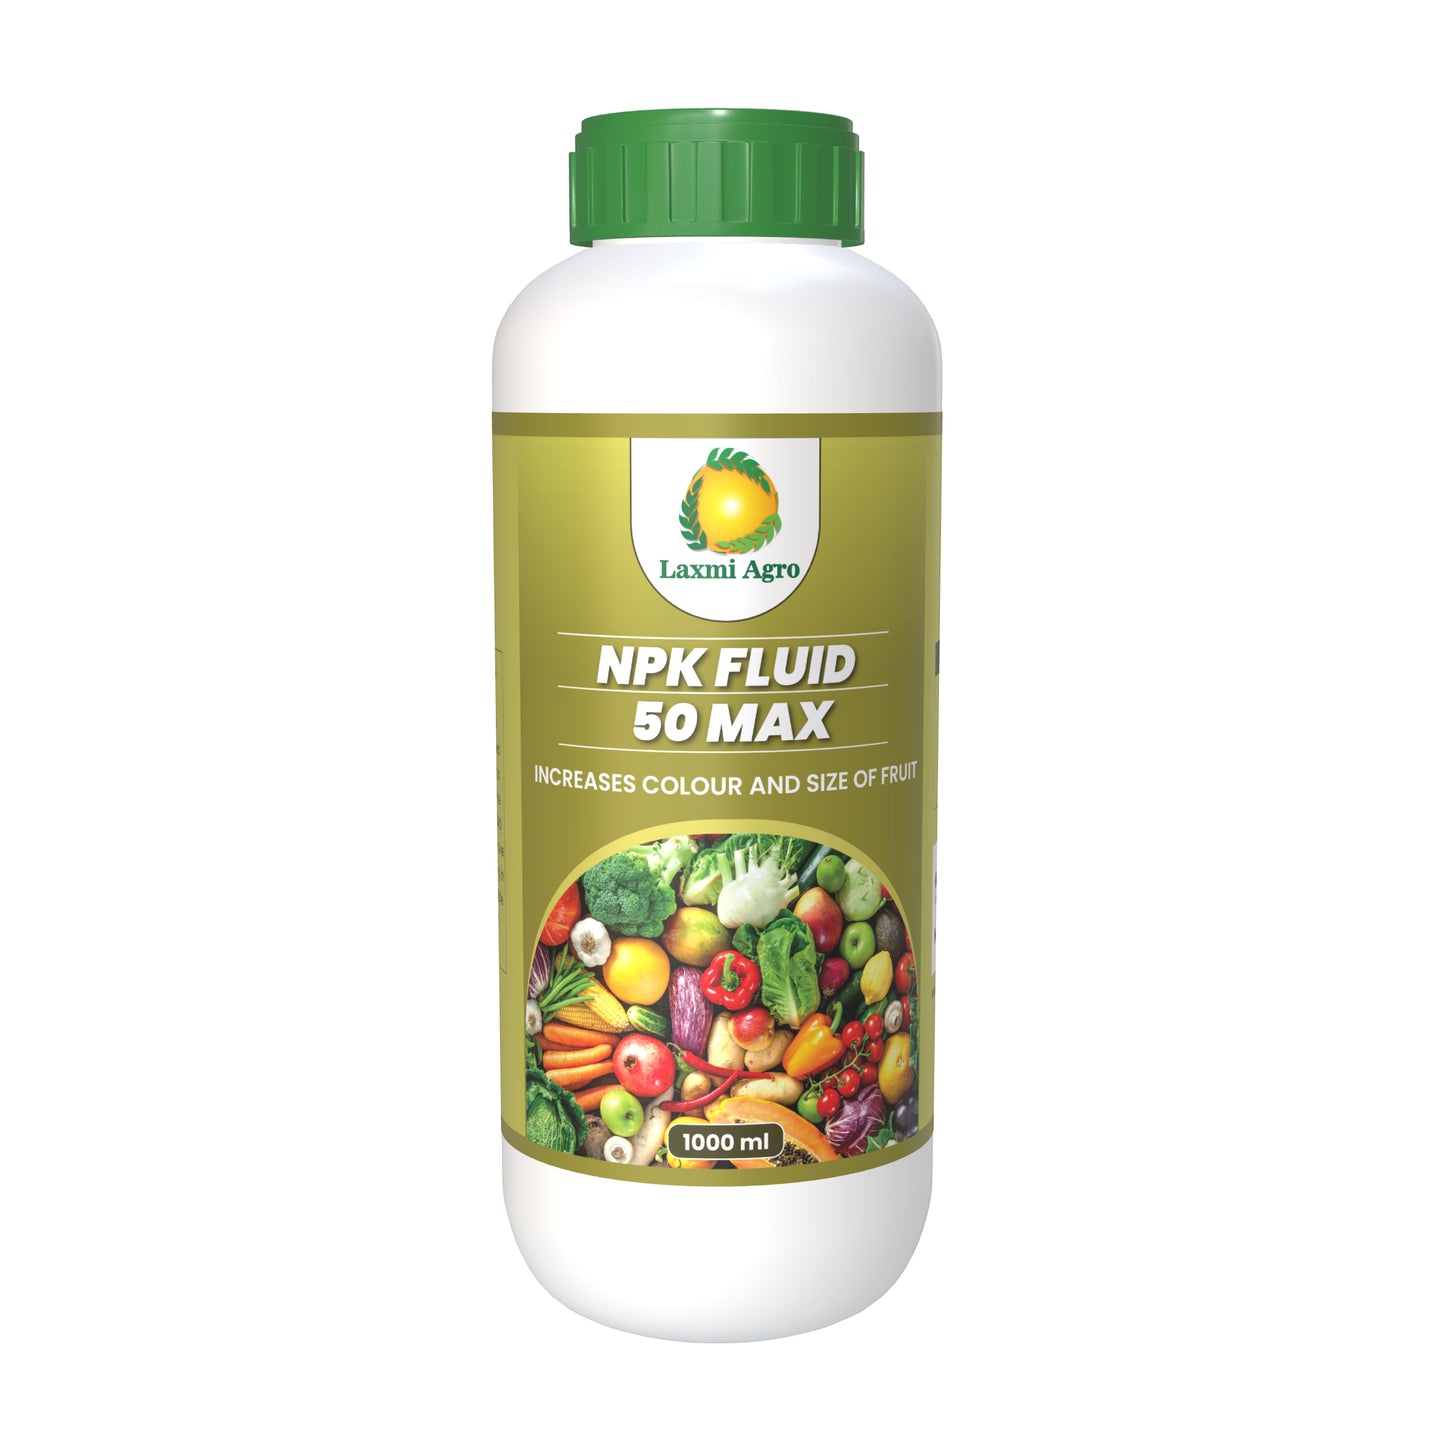 Laxmi Agro NPK FLUID 50 MAX| Fruiting and Flowering for Gardening | Increases Colour and Size of Fruit